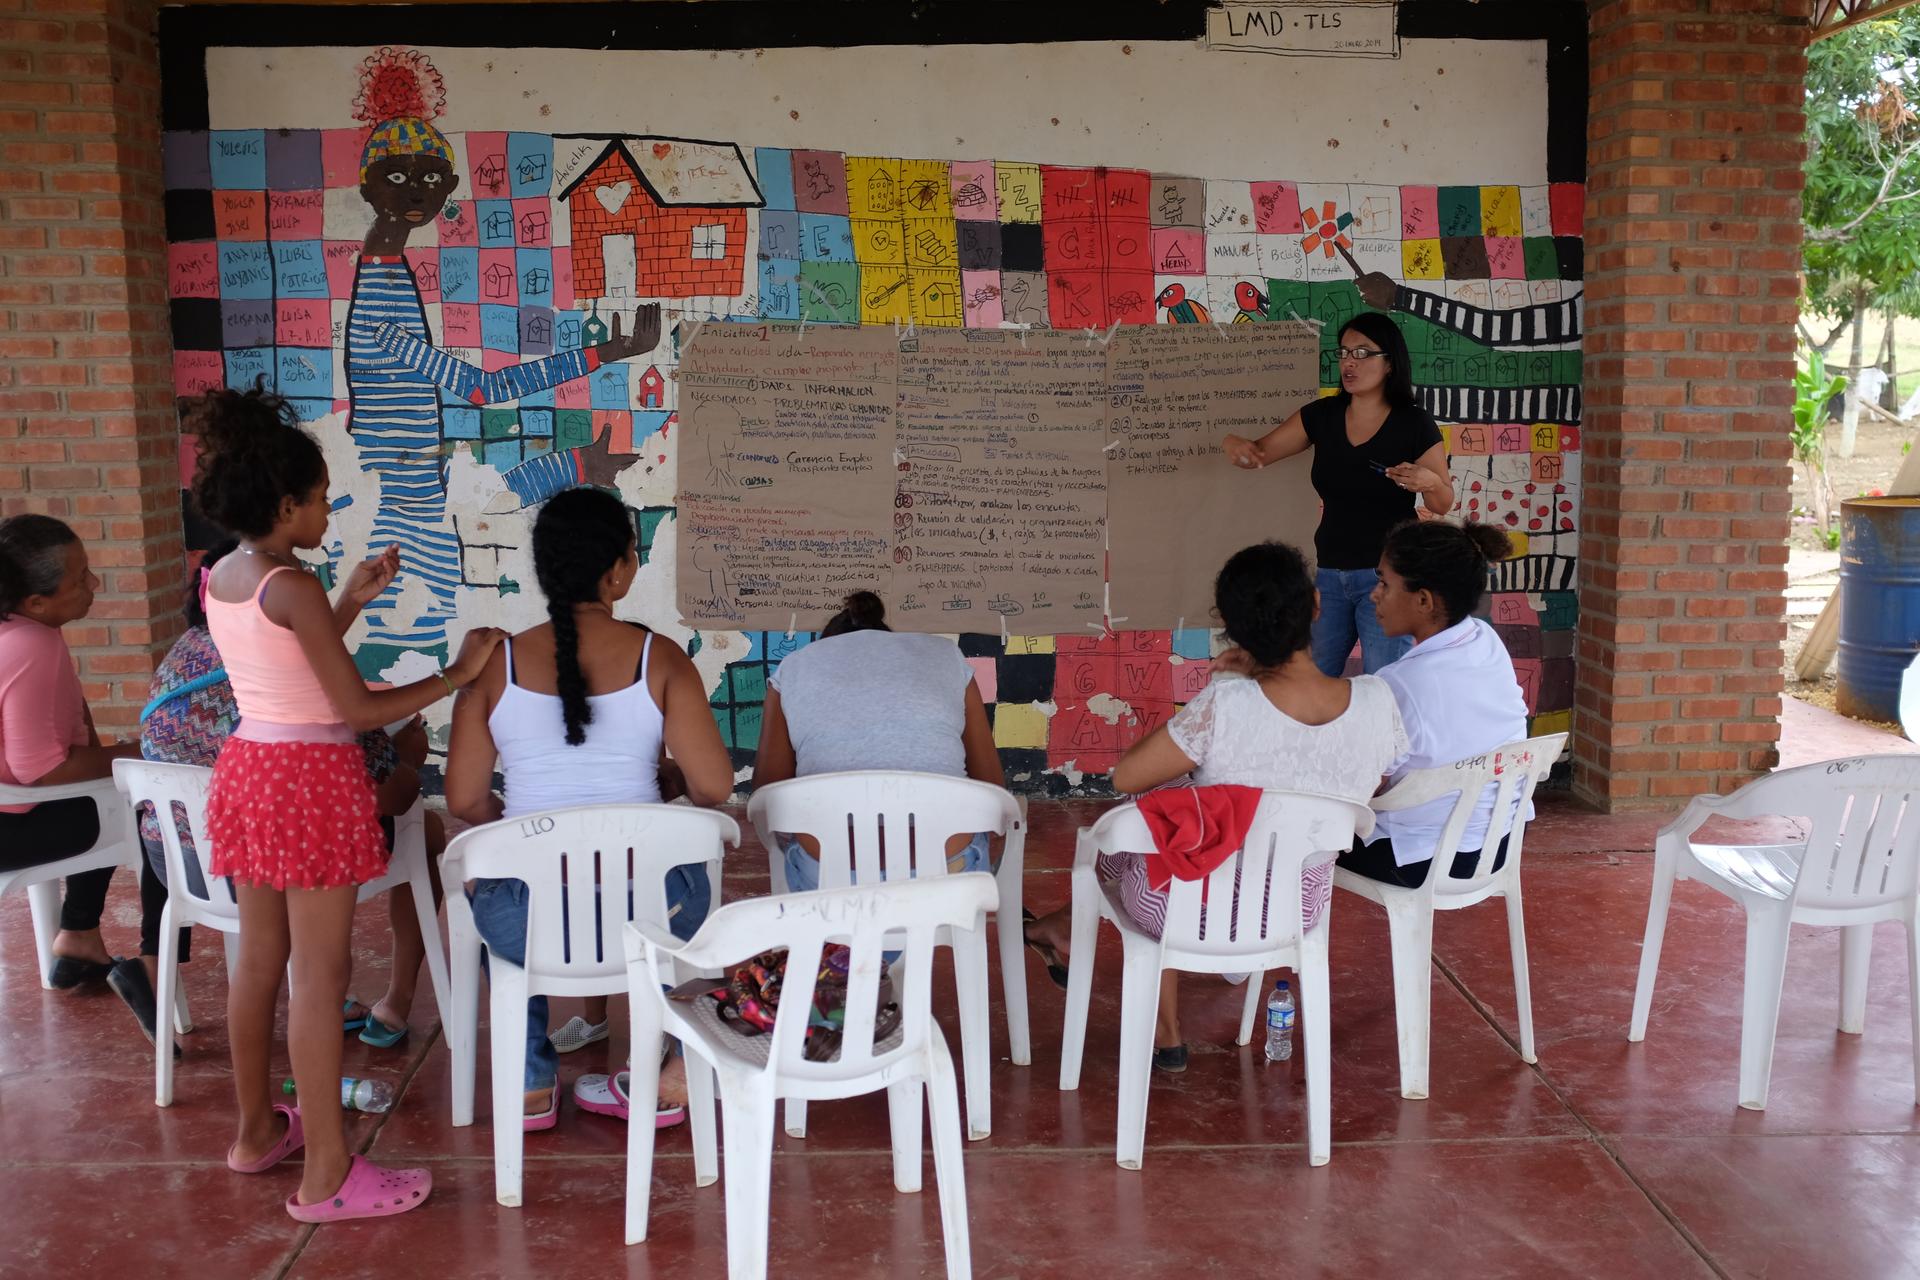 Residents of the City of Women attend a workshop at the community center.